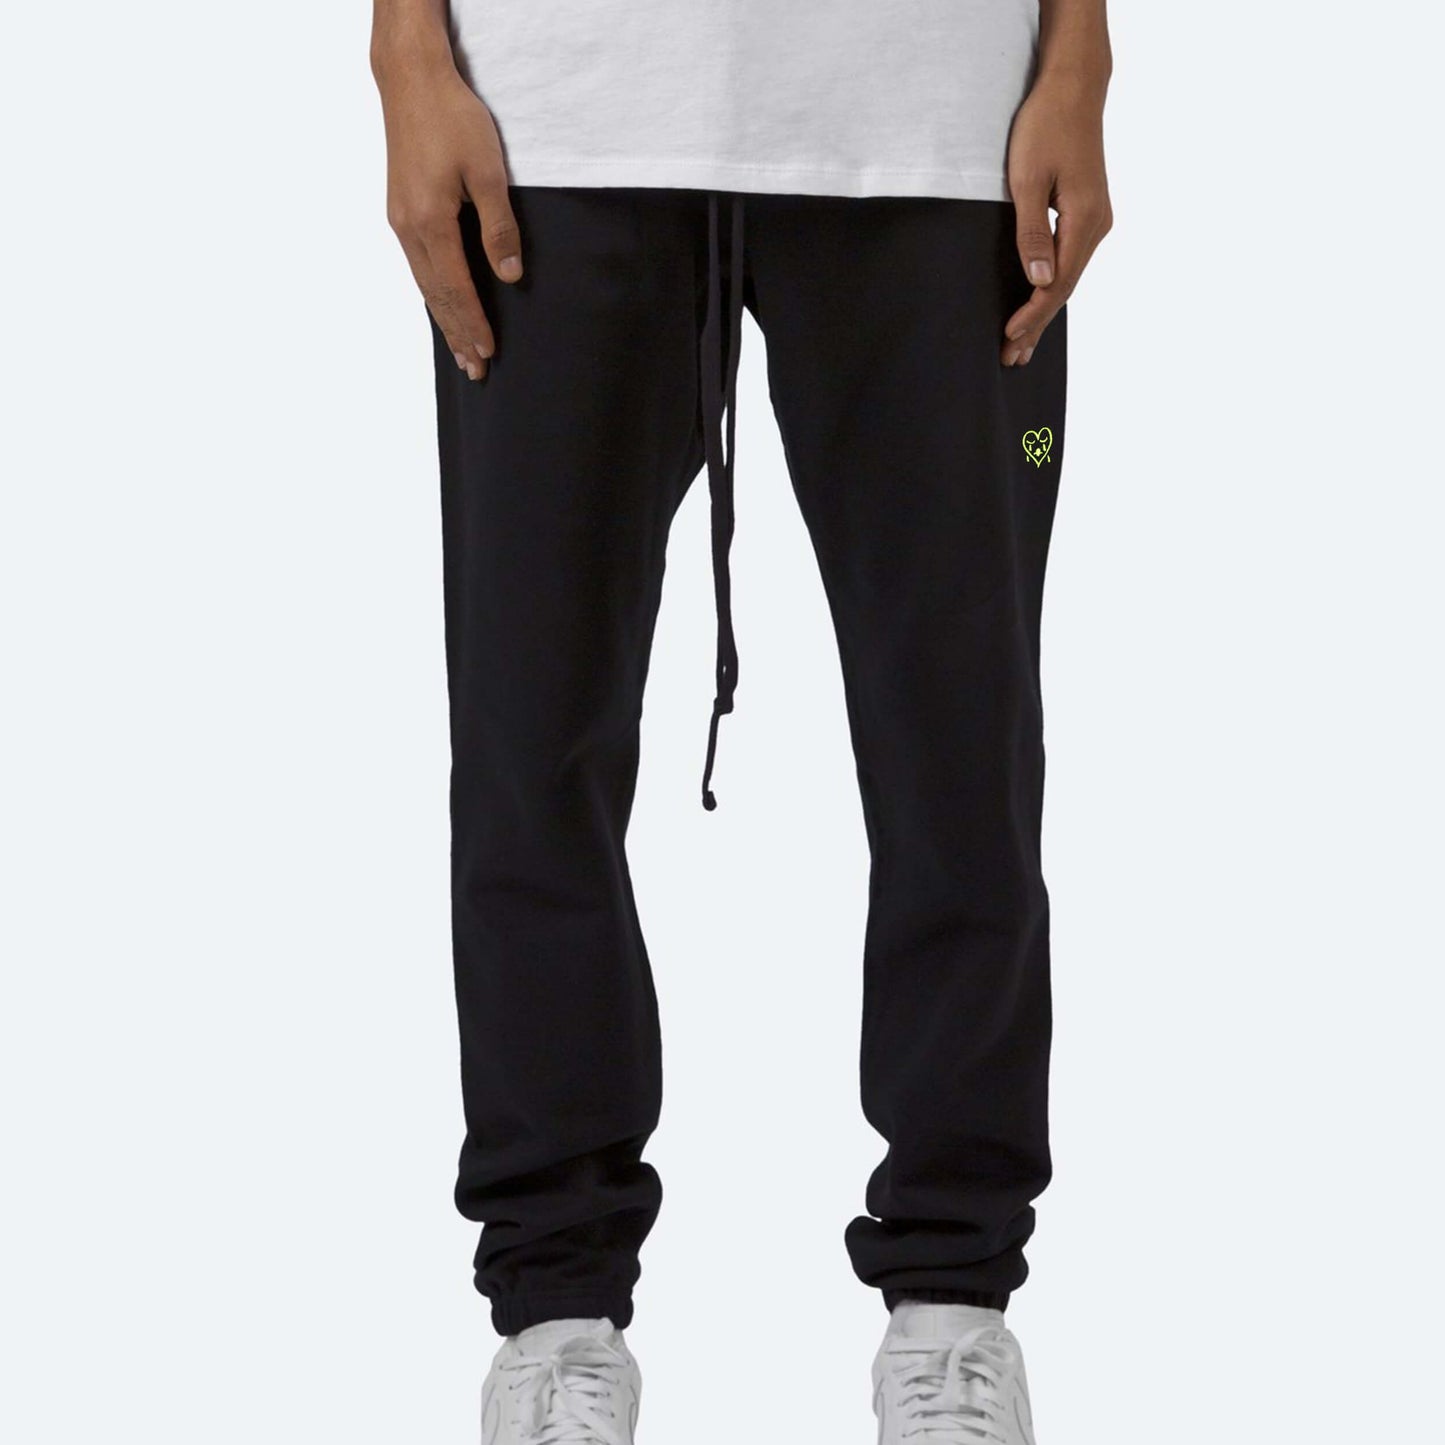 Embroidered Sweatpants | Black - XS